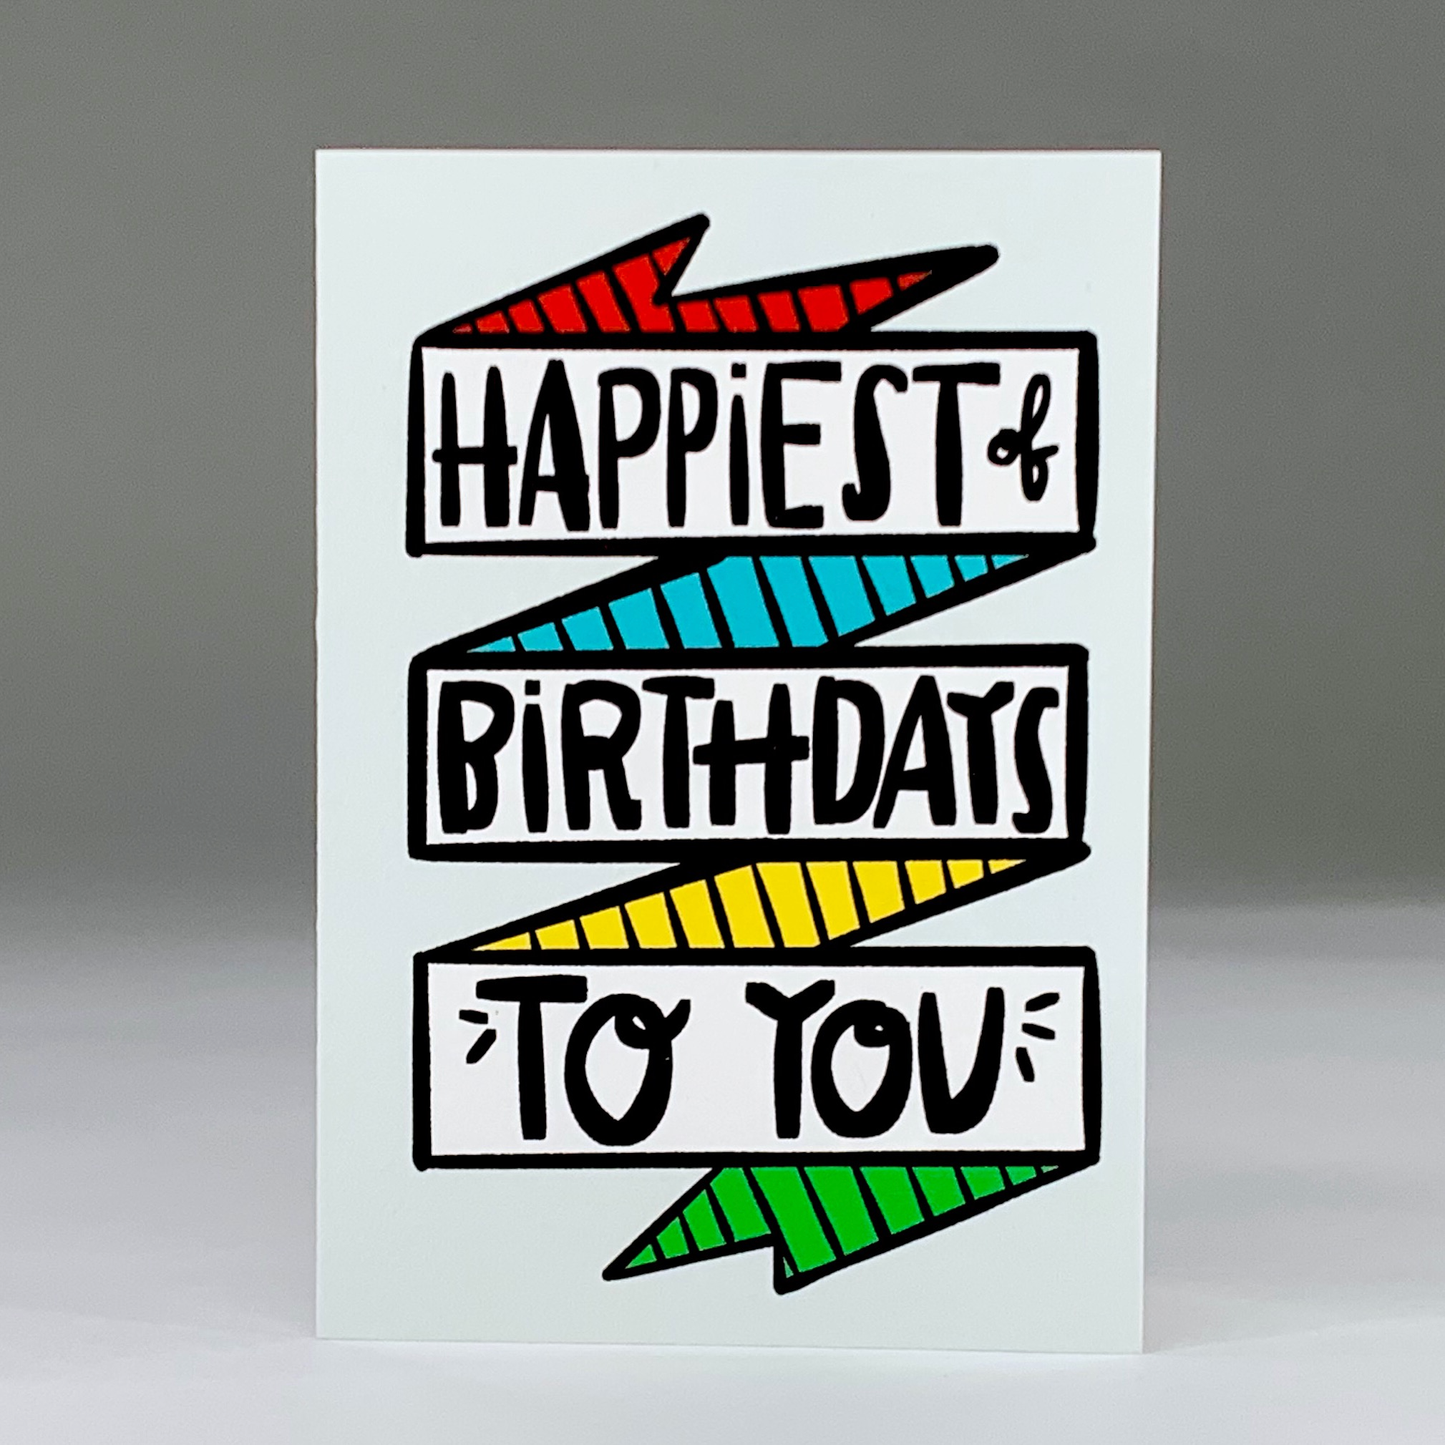 HAPPIEST OF BIRTHDAYS TO YOU BANNER CARD